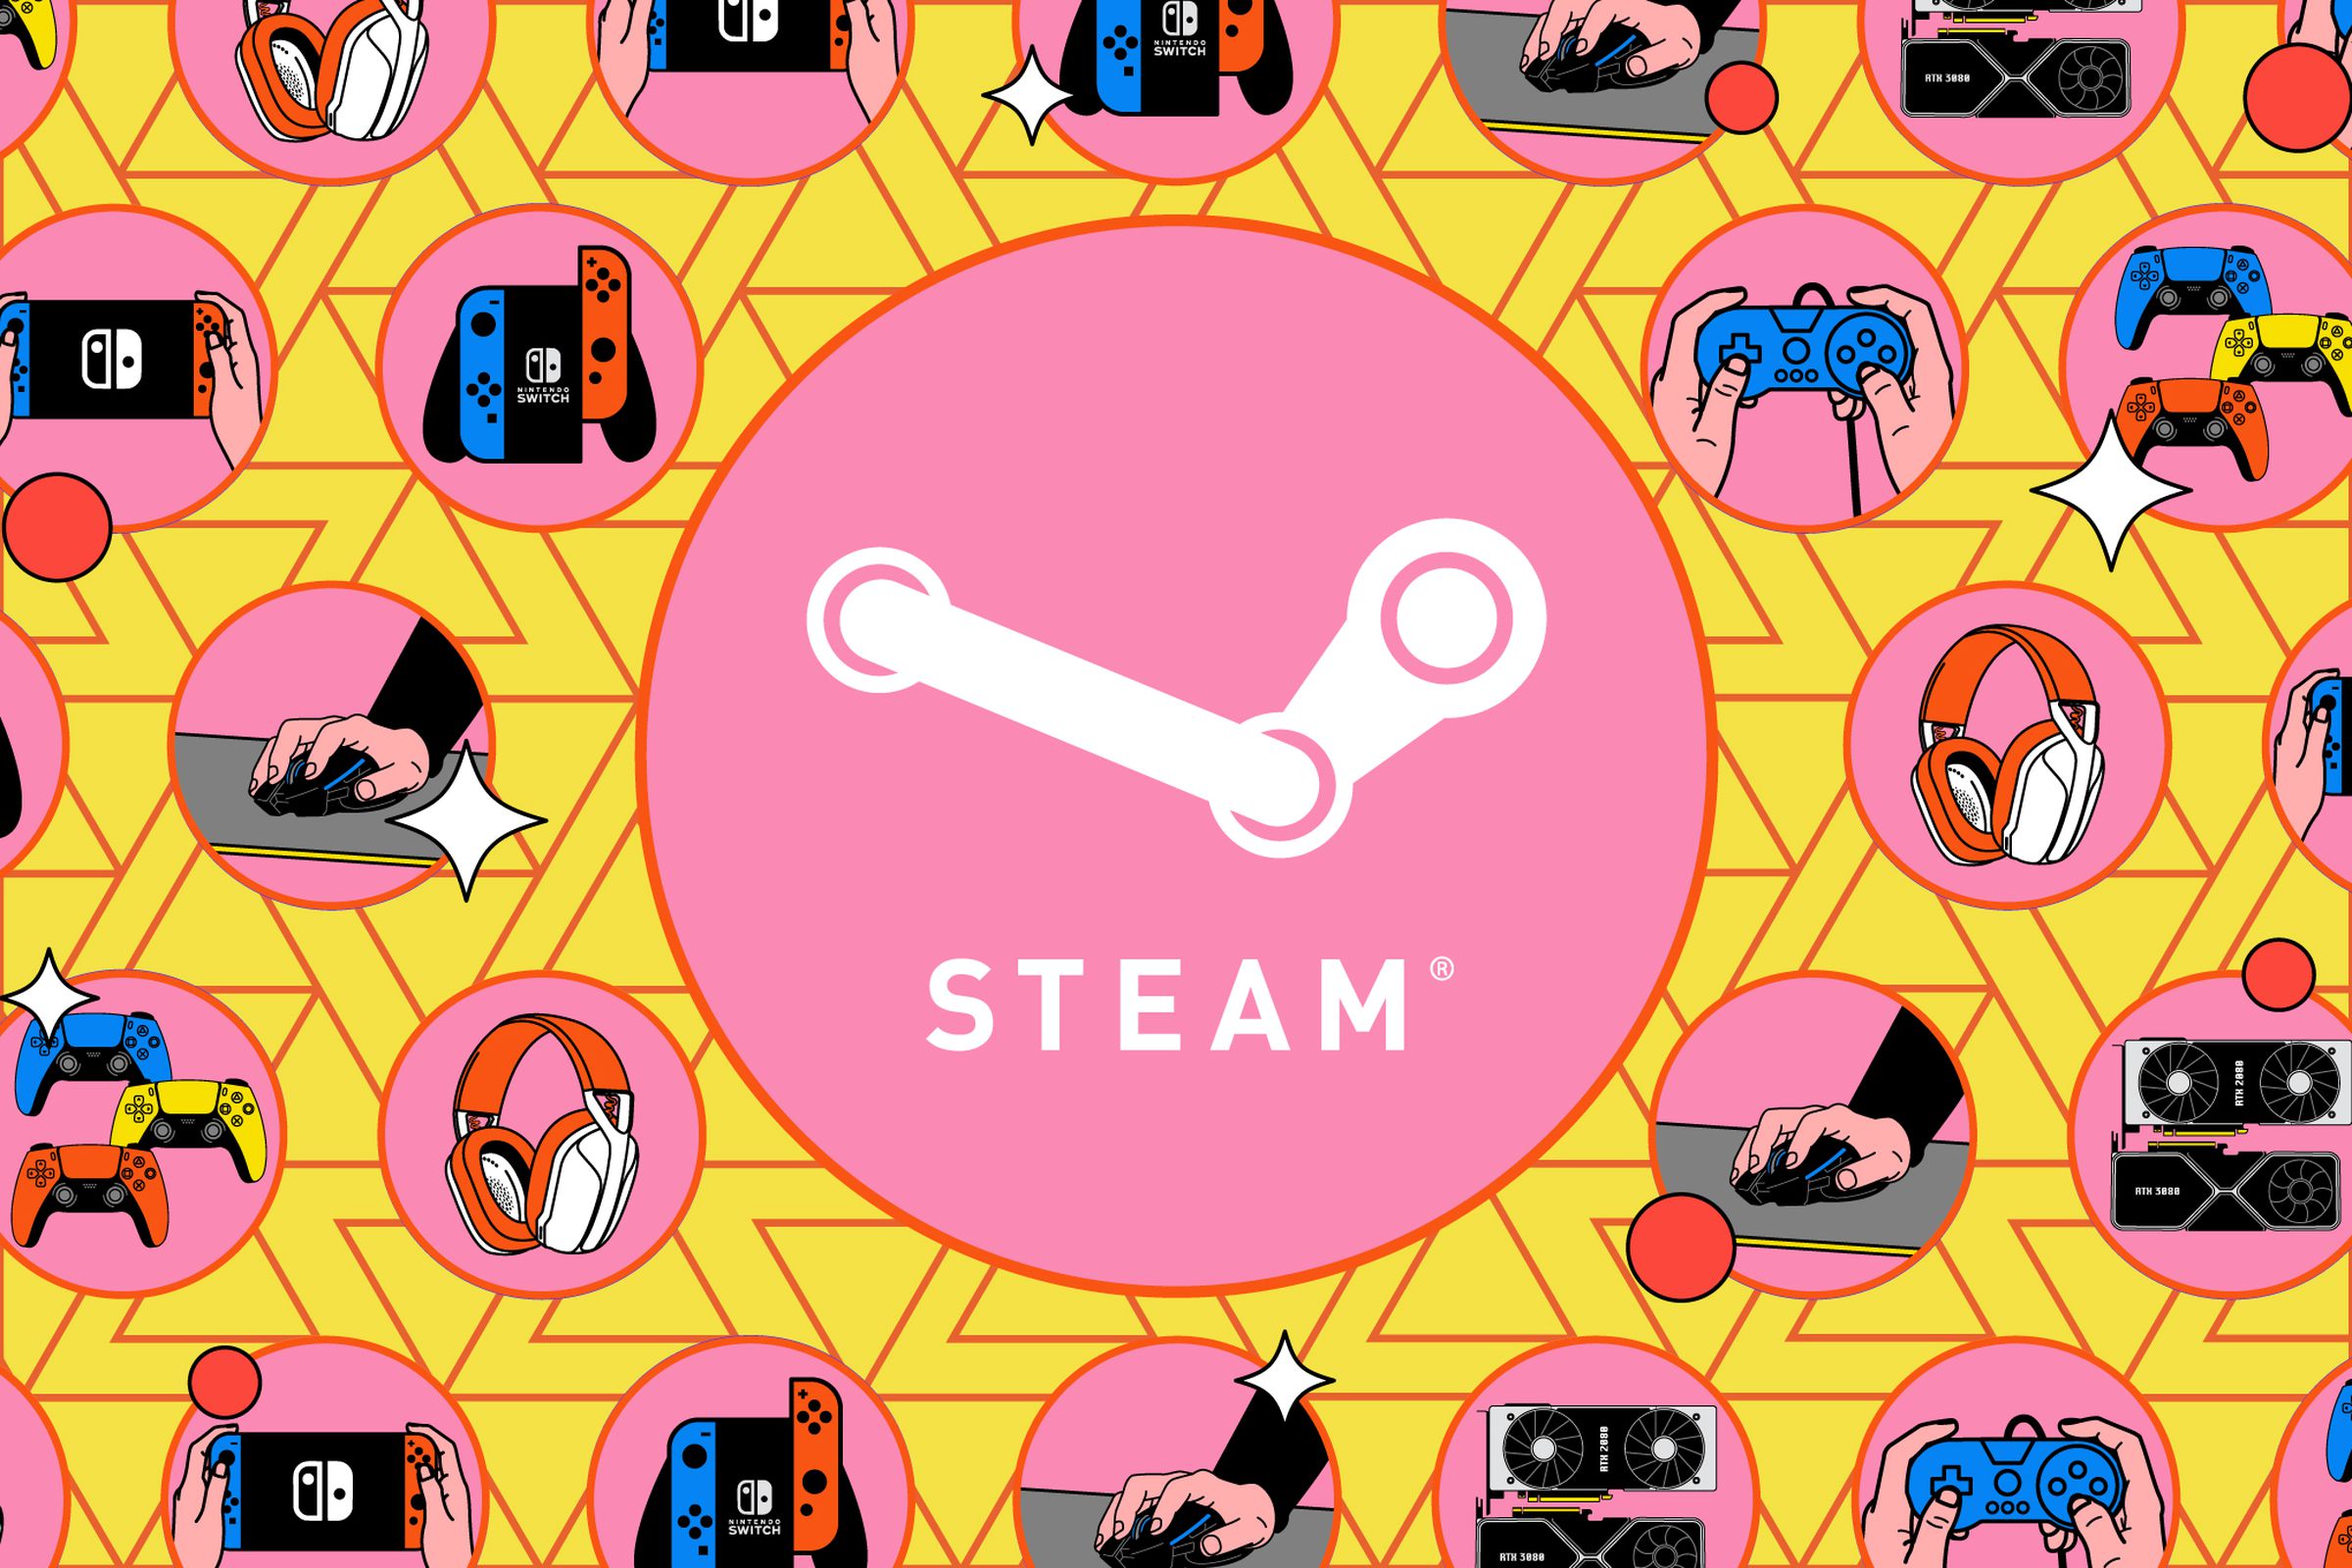 Steam icon (two long metal pieces attached so they look like an arm) with the word “Steam” underneath, in a pink circle with a variety of drawn icons around them.